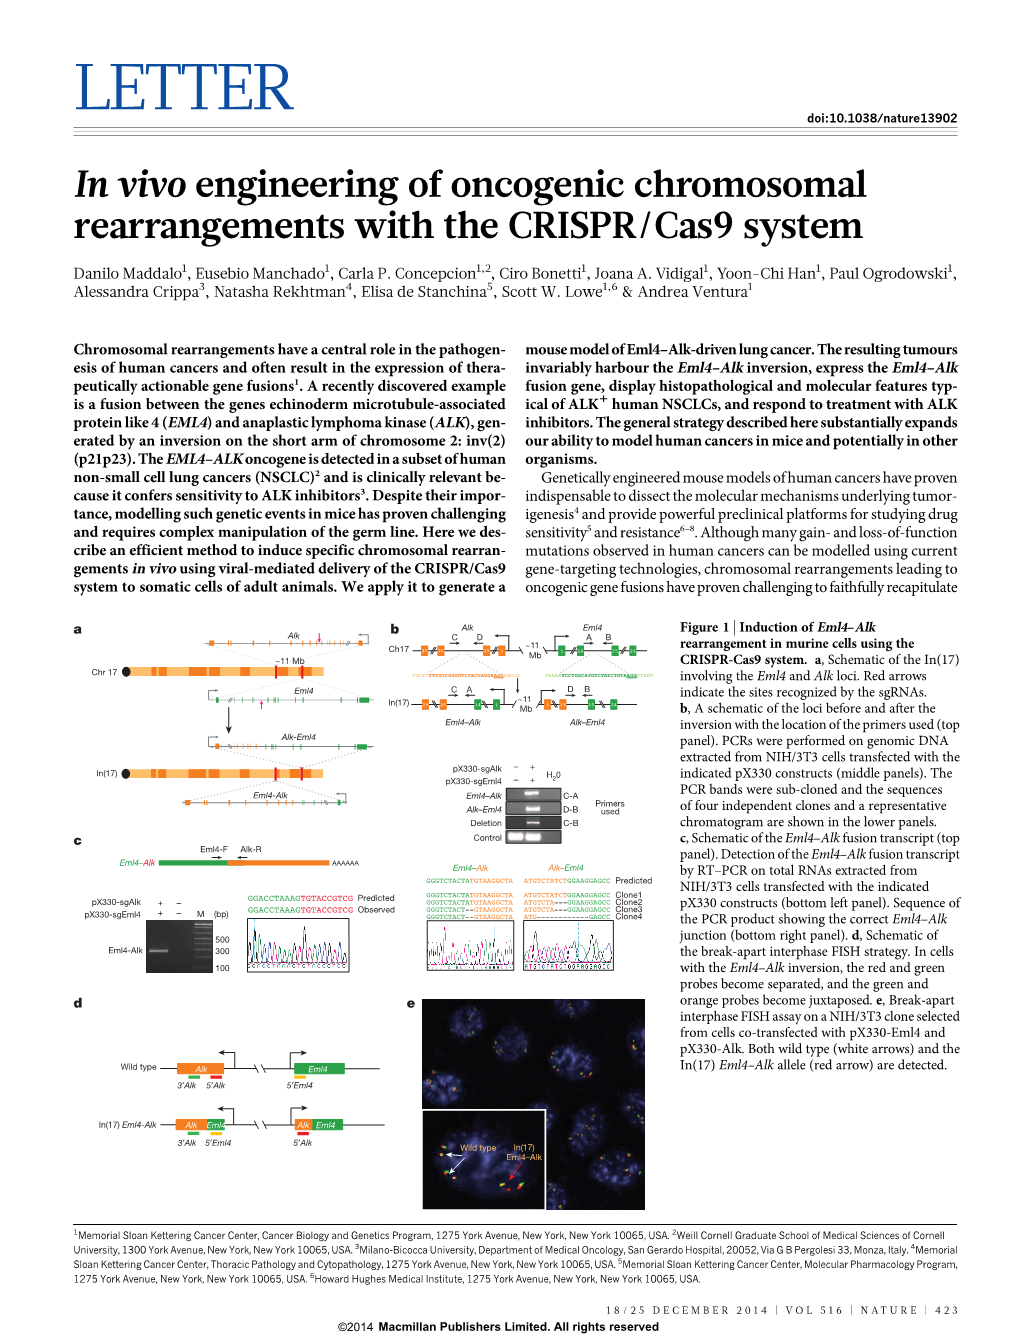 In Vivo Engineering of Oncogenic Chromosomal Rearrangements with the CRISPR/Cas9 System